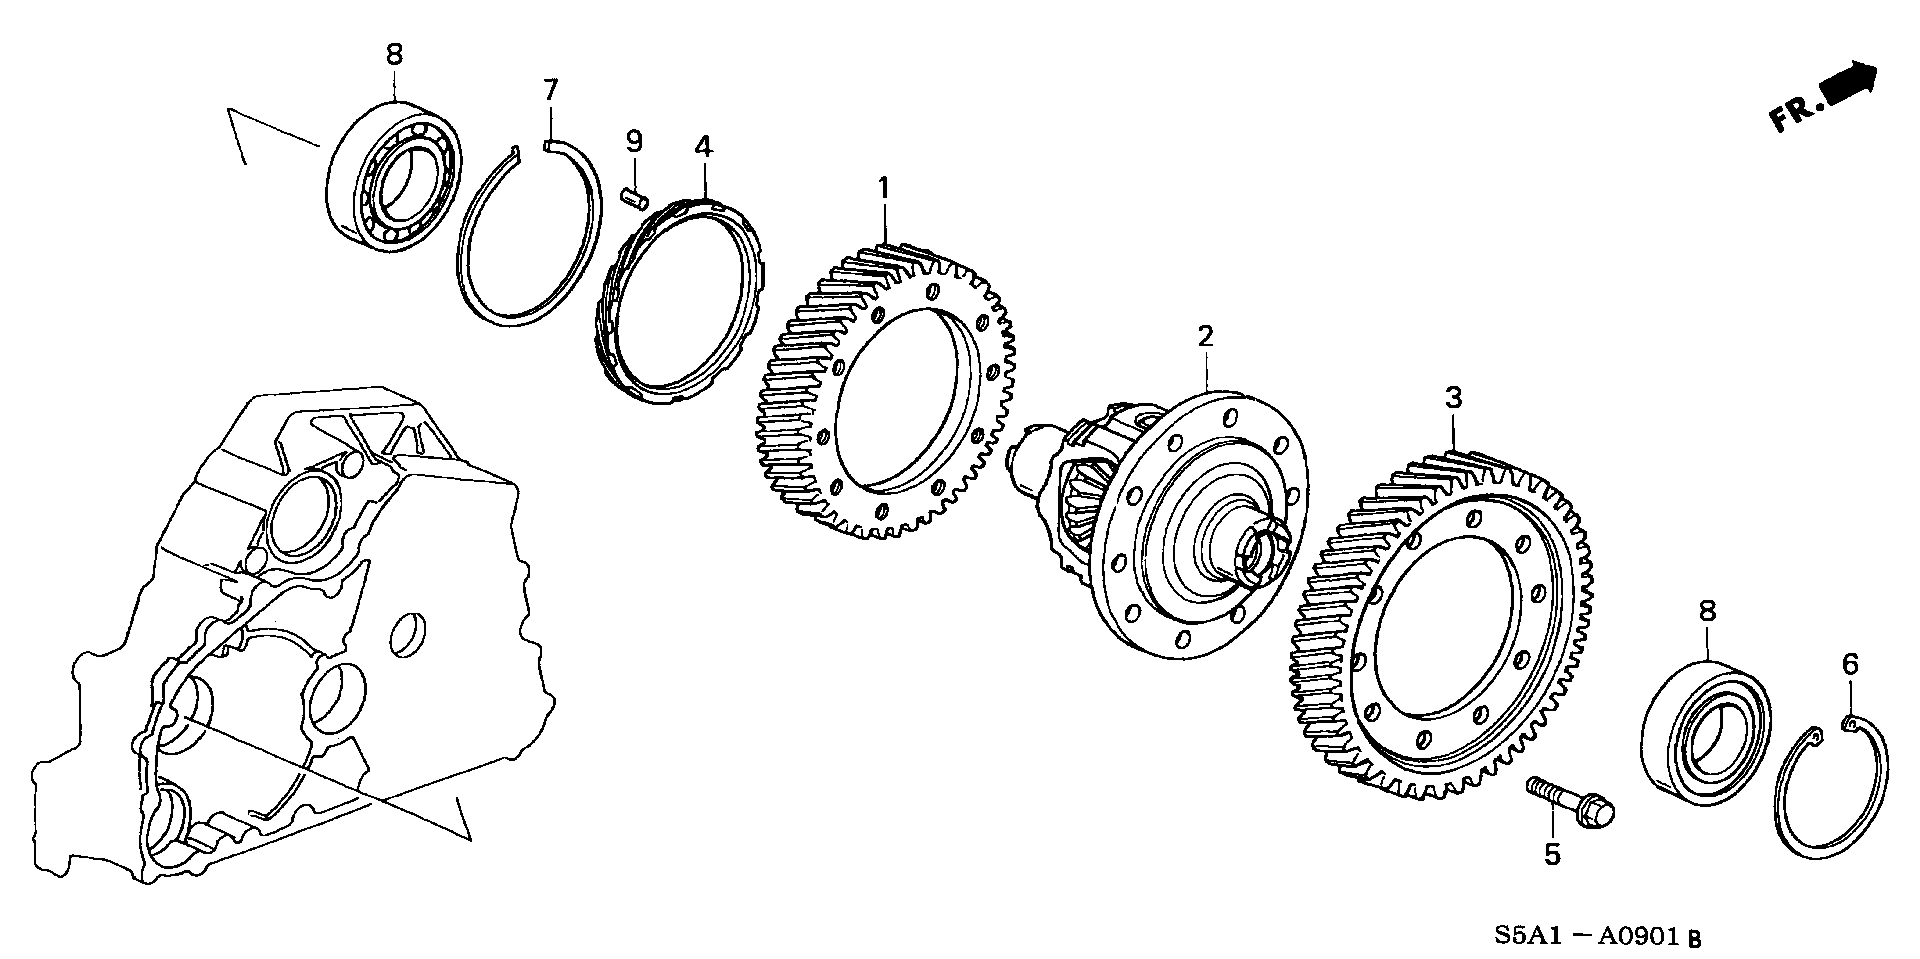 DIFFERENTIAL(4WD) (1.7L)